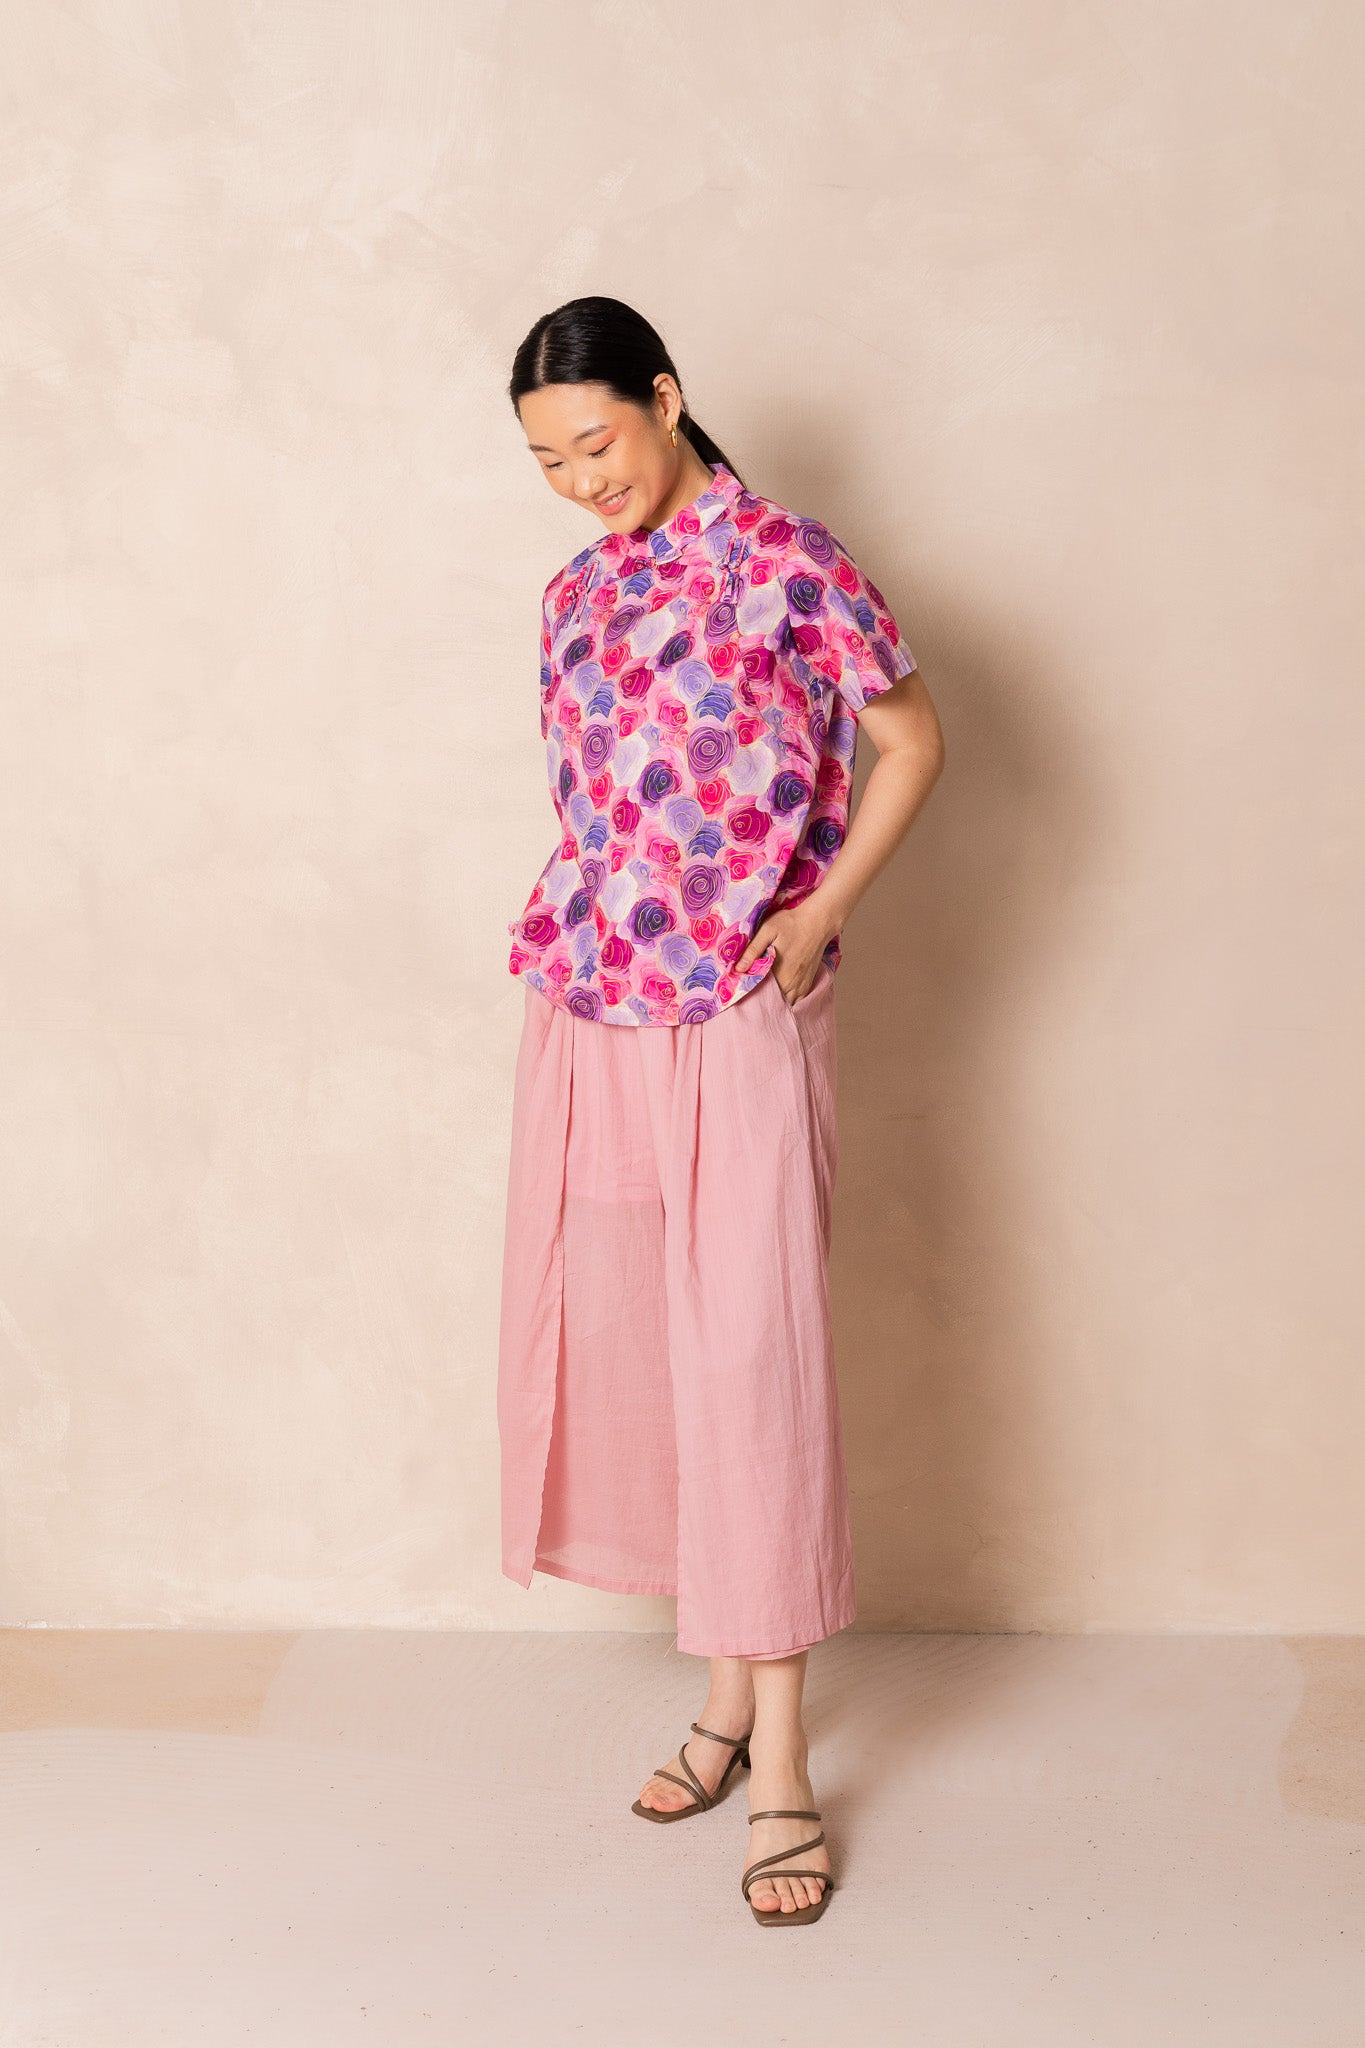 Water Colour Pink Rose Short Sleeve Cheongsam Top, available on You Living